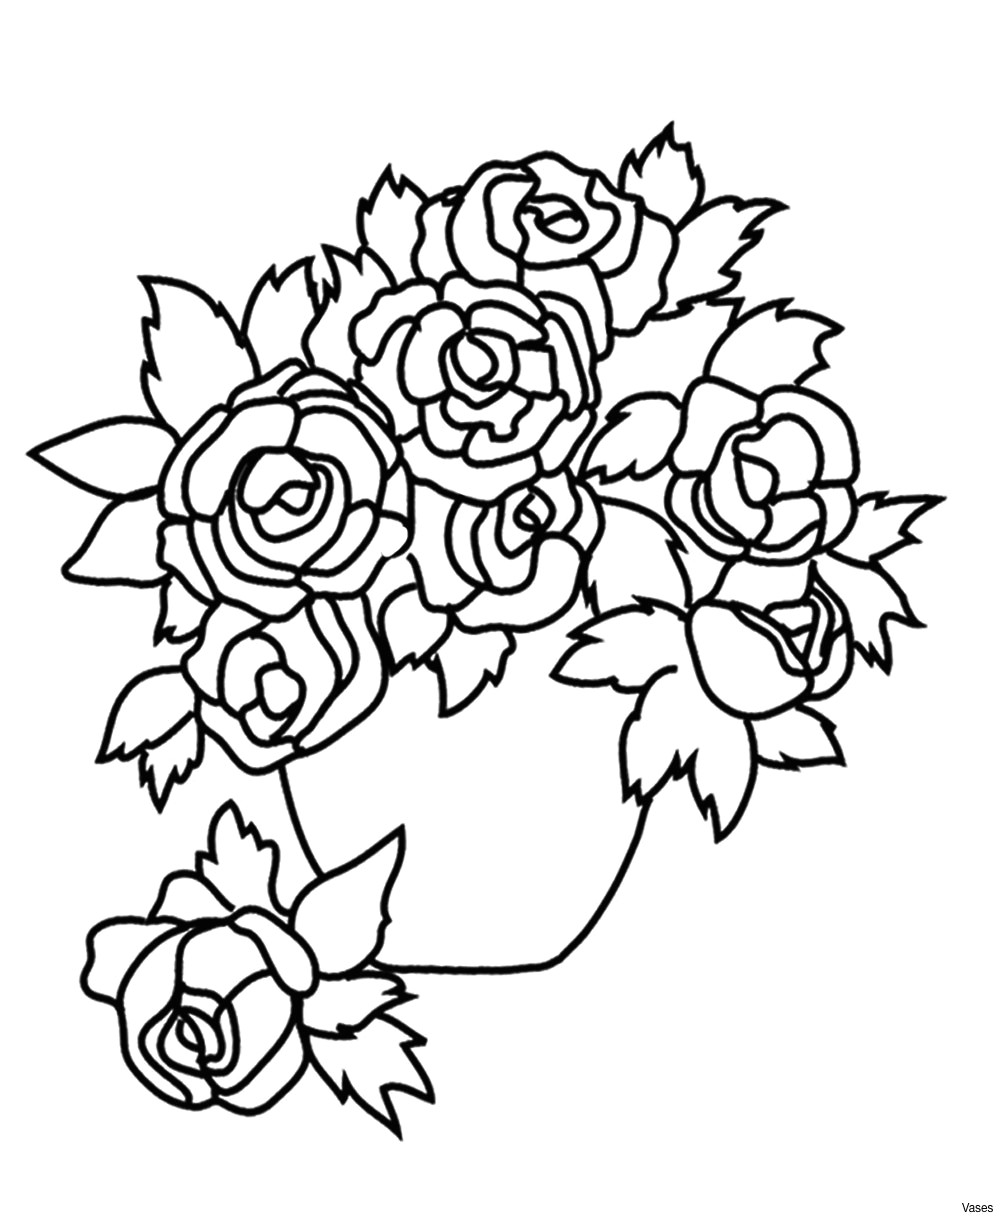 Drawings Of Flowers In A Vase Flower Coloring Pages for Adults New Cool Vases Flower Vase Coloring